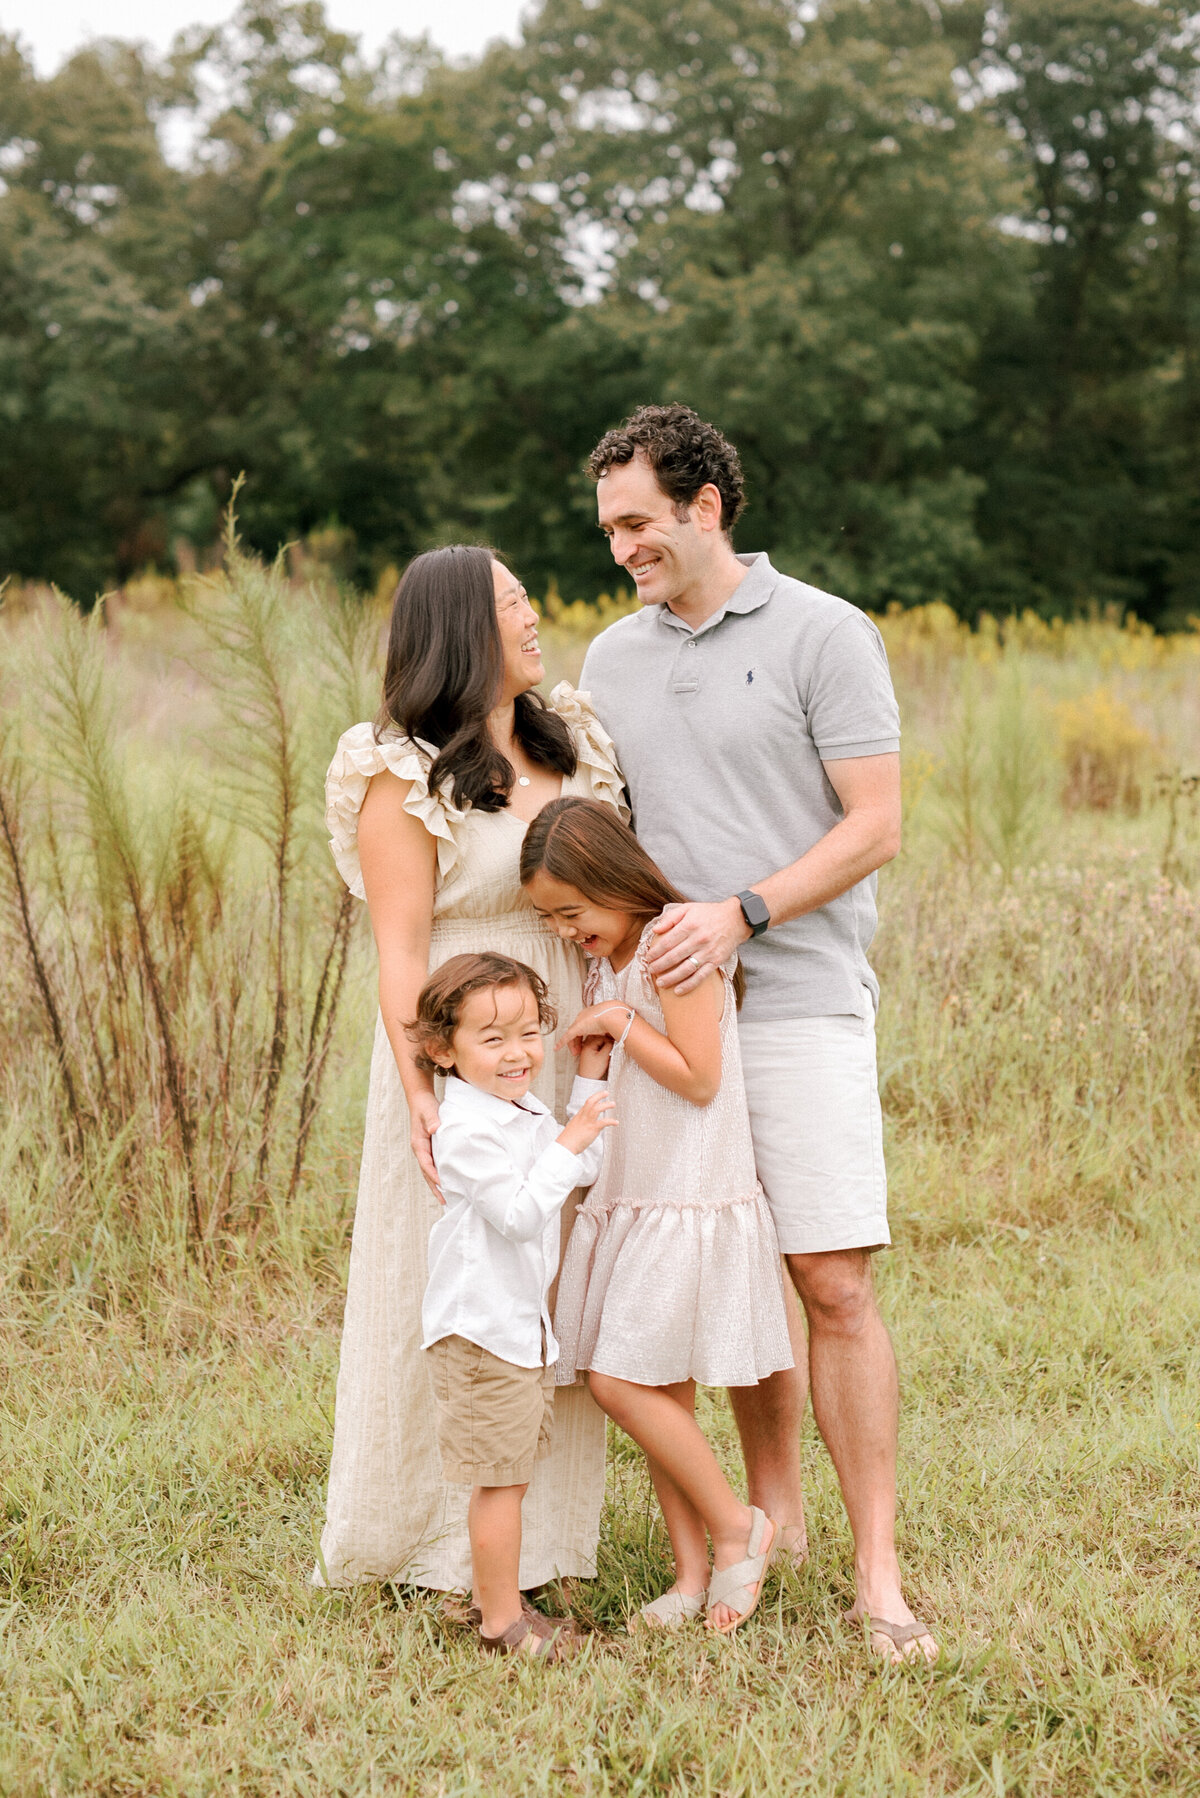 Family laughing and embracing in a field during their Raleigh family session. Photographed by Raleigh Family Photographer A.J. Dunlap Photography